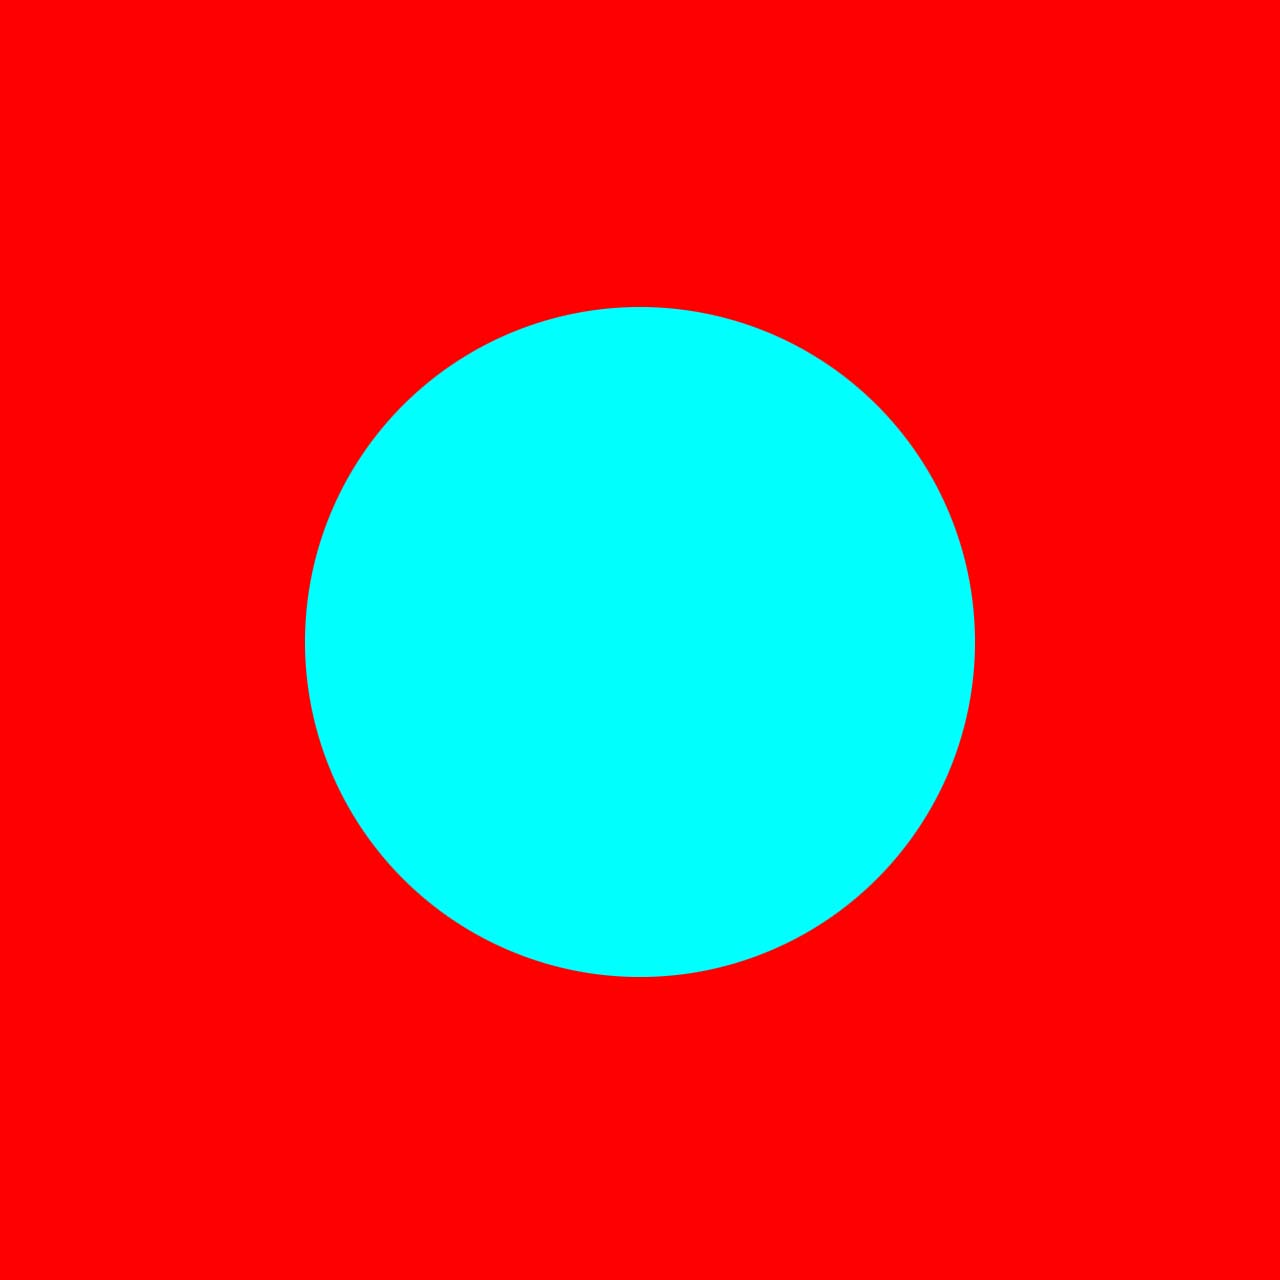 cyan circle on red background